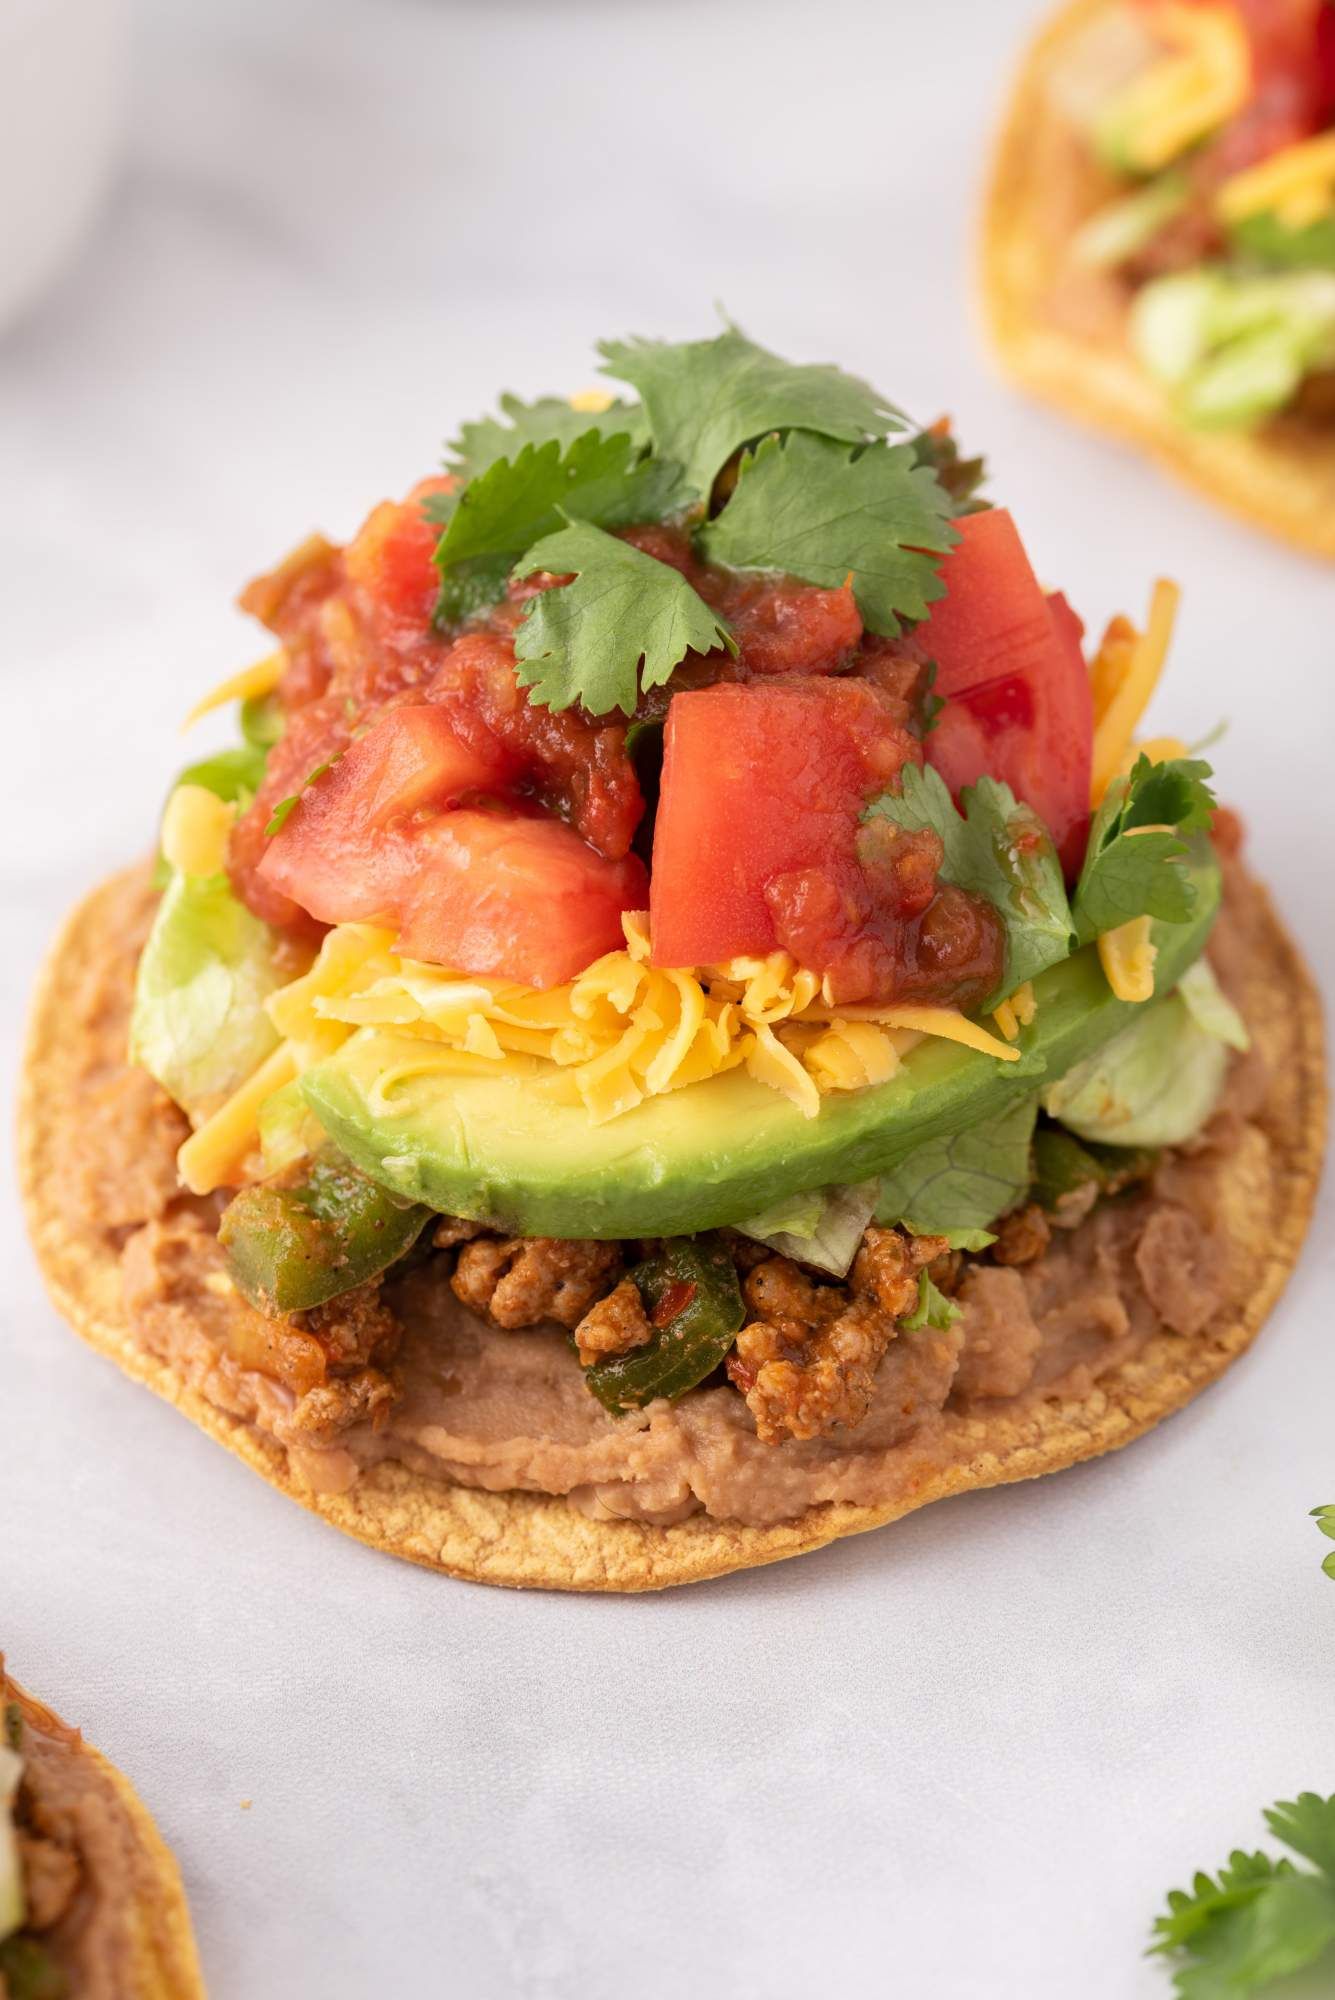 Tostada with ground turkey, refried beans, salsa, avocado, lettuce, and shredded cheese.